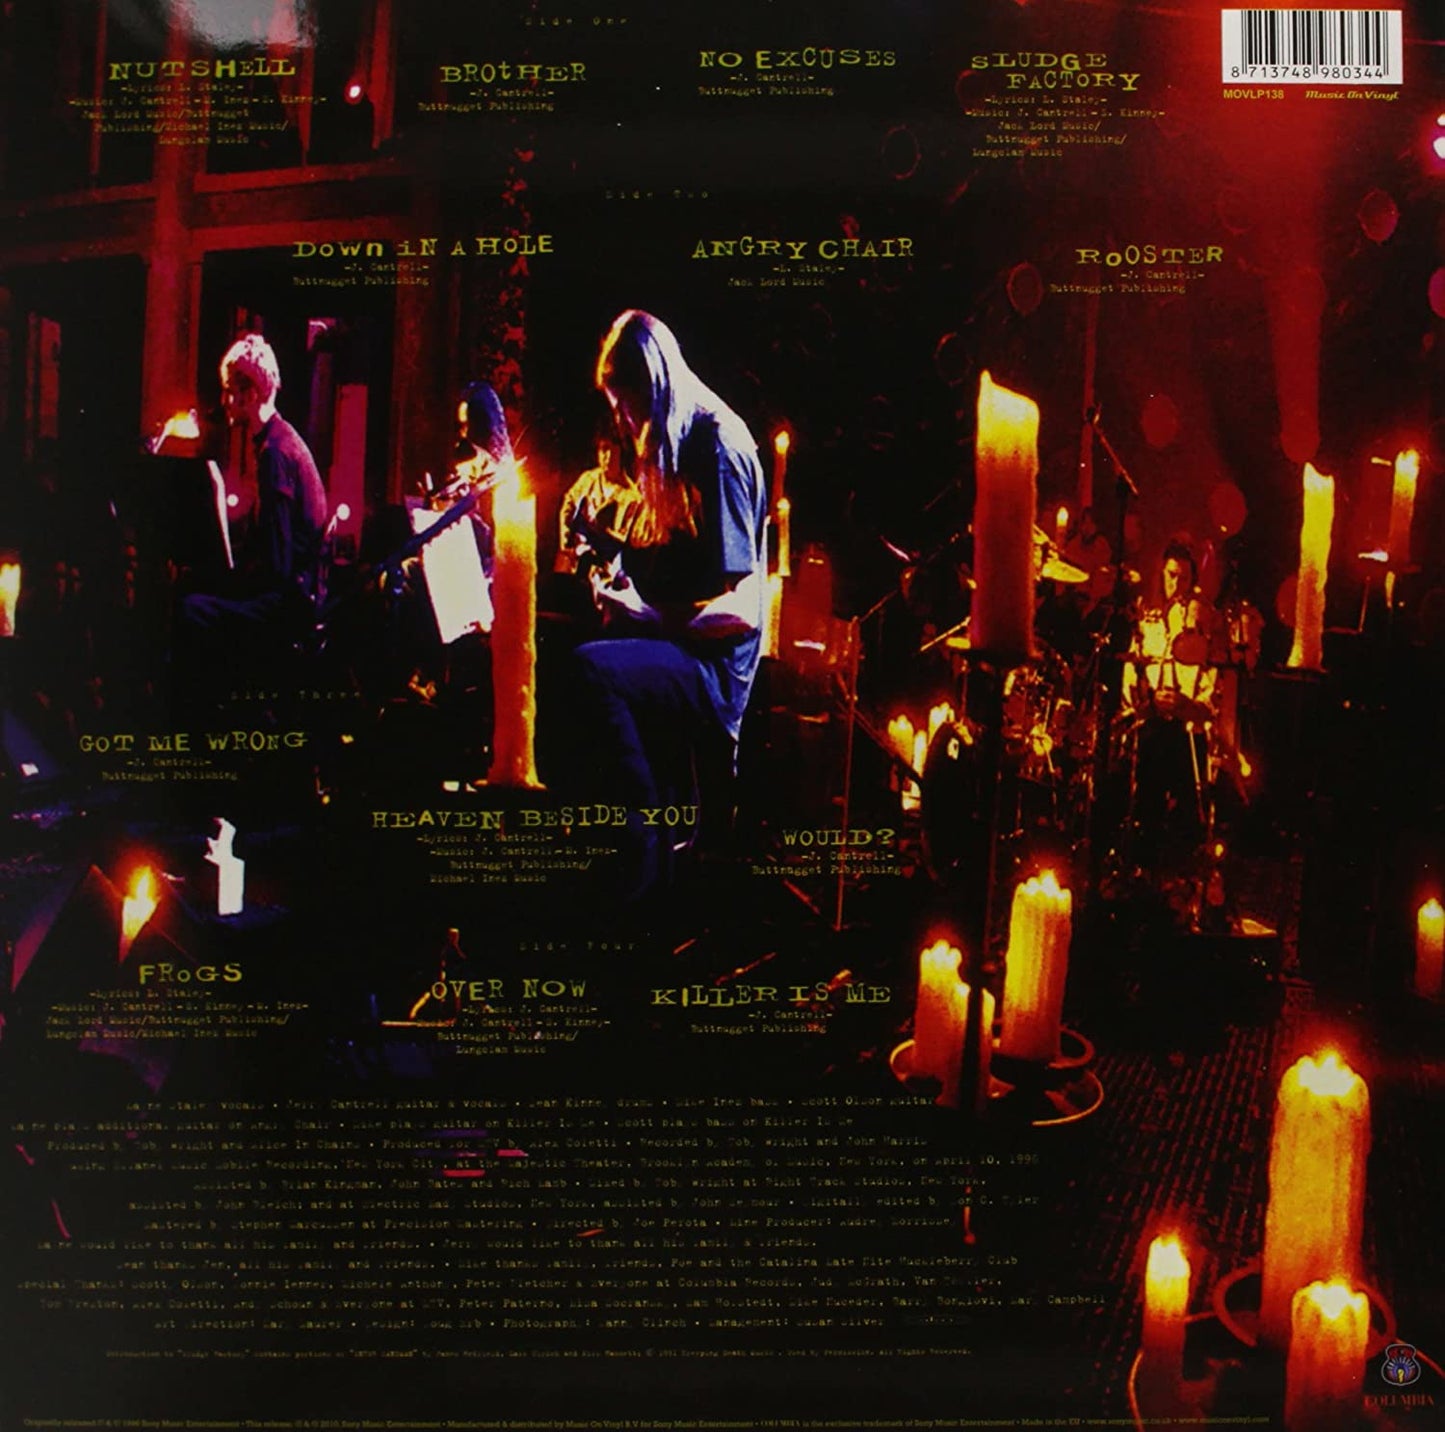 Alice In Chains/MTV Unplugged [LP]